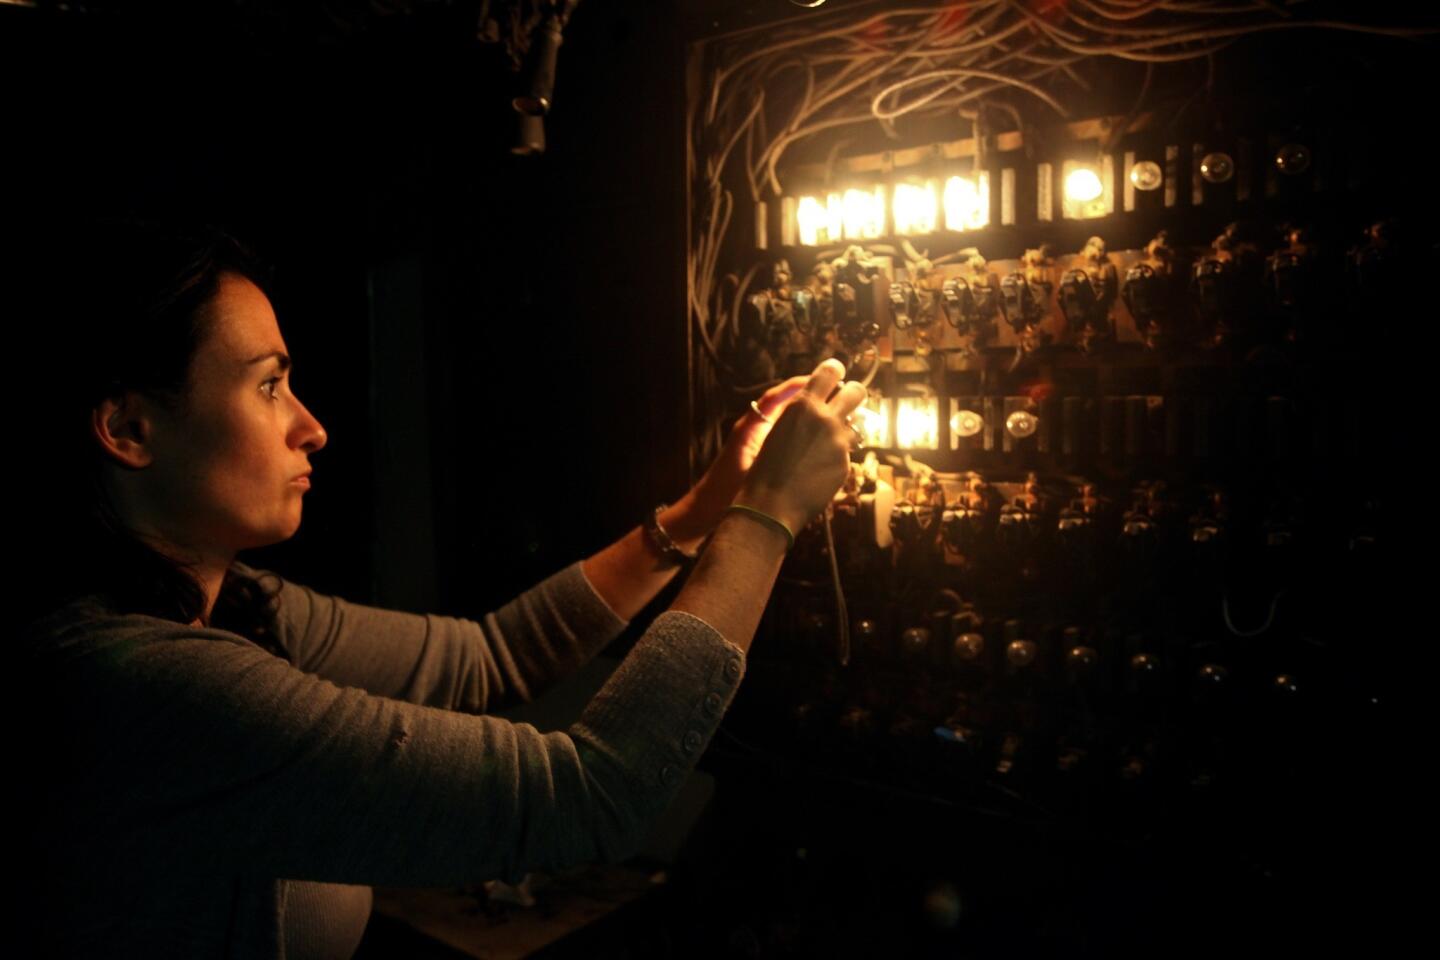 Sandi Hemmerlein of the Los Angeles Historic Theatre Foundation takes a picture of the Tower theater's lighting board, used to control the house and stage lights, in the projection booth.